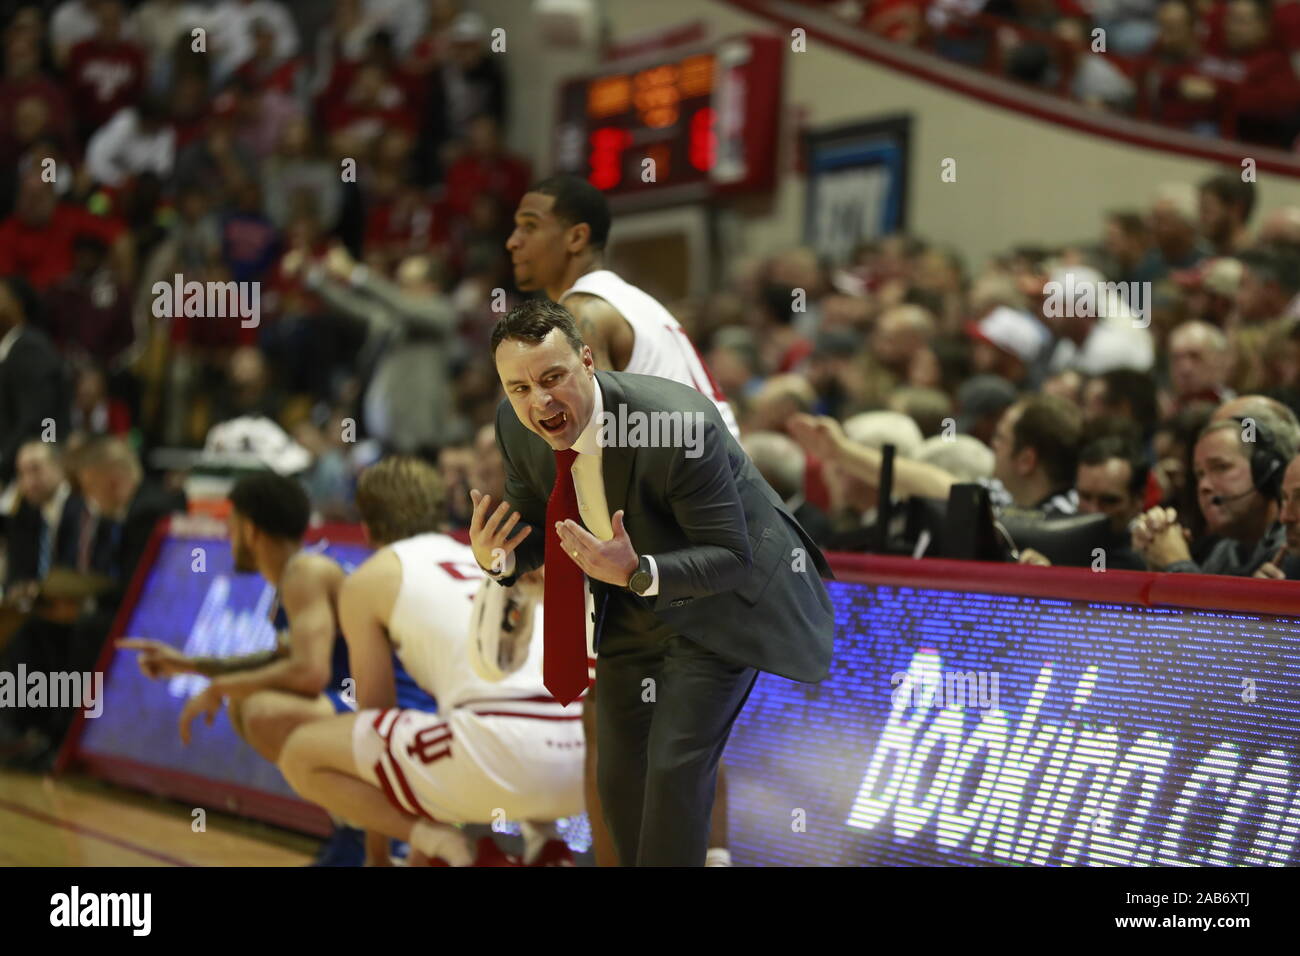 Bloomington, Indiana, USA. 25th, Nov., 2019. Indiana University coach Archie Miller coaches against Louisiana Tech during an NCAA college basketball game at IU's Assembly Hall in Bloomington, Indiana, USA. Credit: Jeremy Hogan/Alamy Live News. Stock Photo